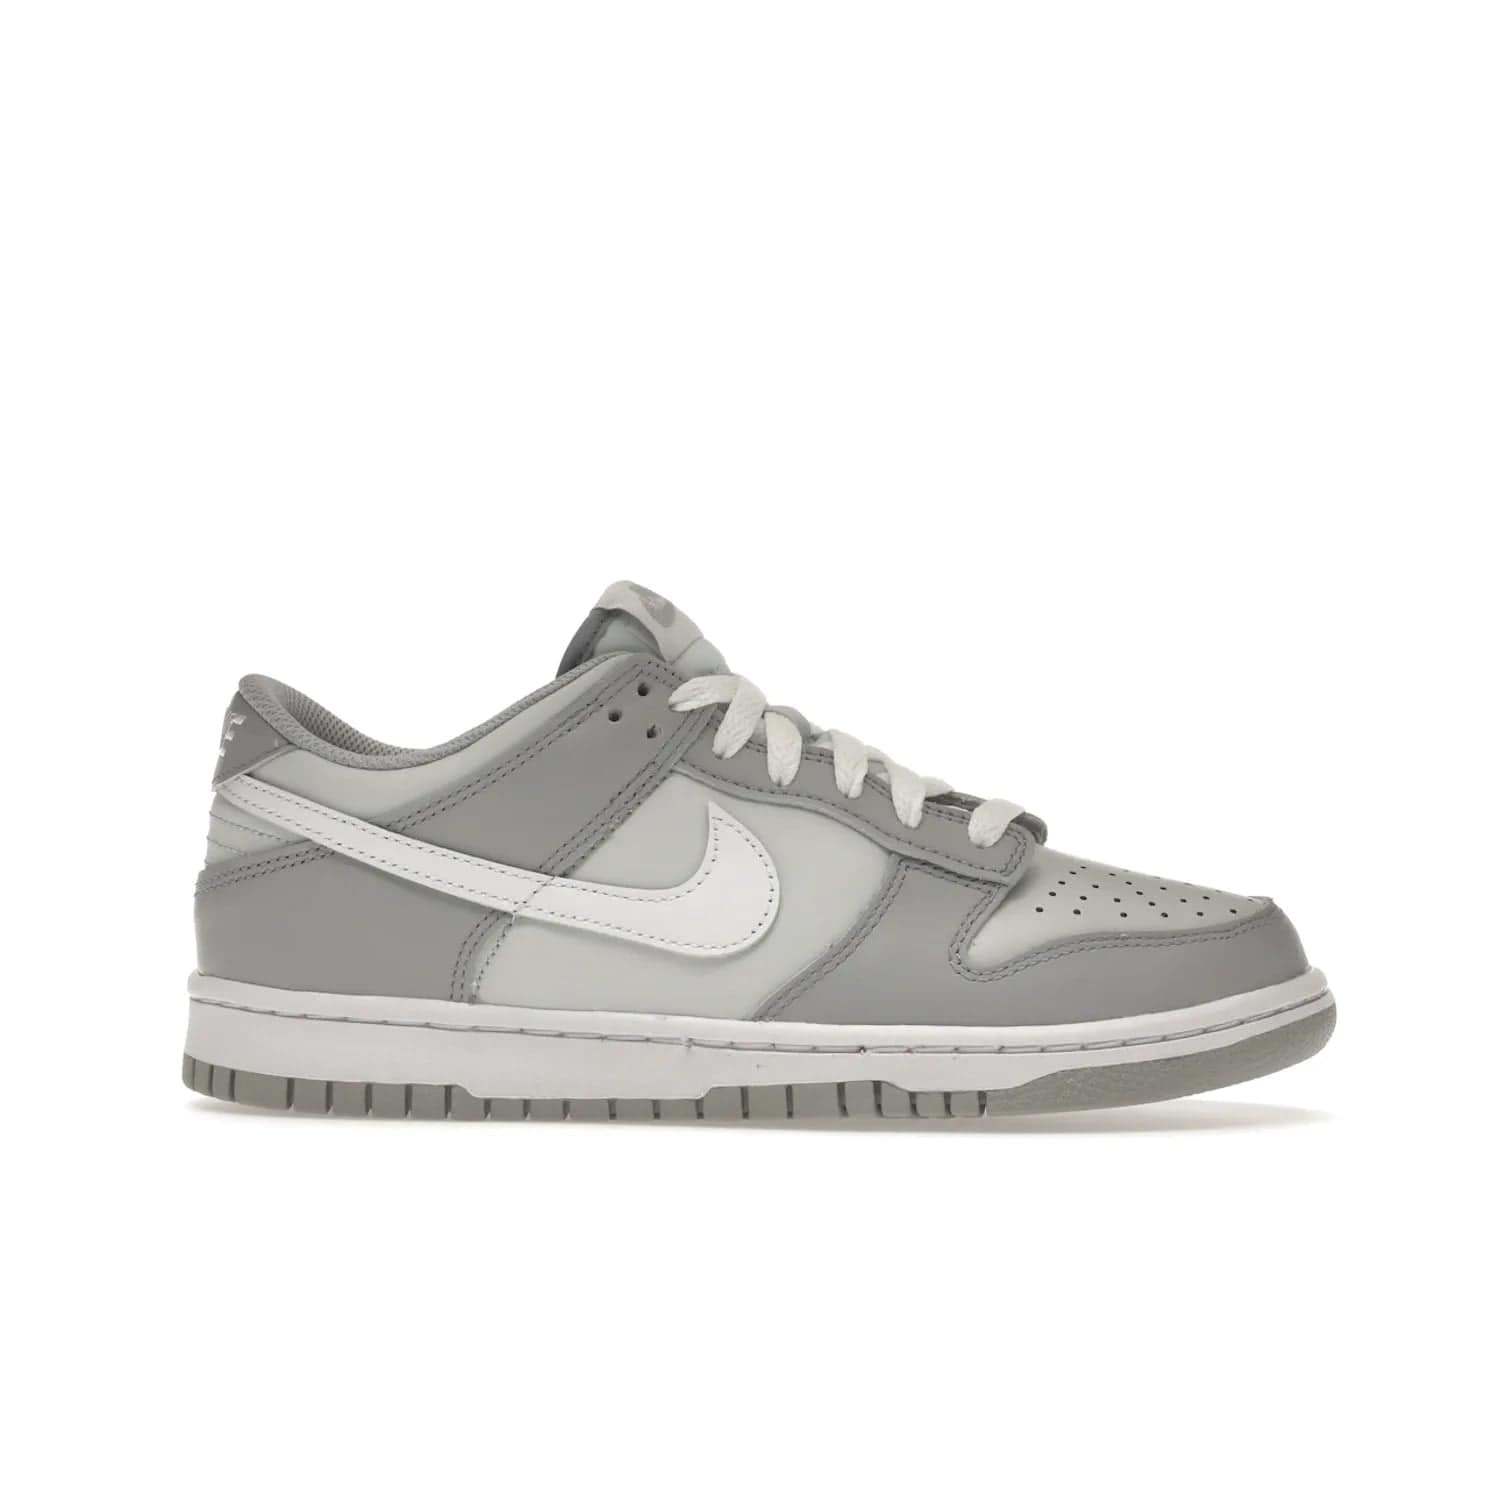 Nike Dunk Low Two-Toned Grey (GS) - Image 2 - Only at www.BallersClubKickz.com - Stylish Nike Dunk Low GS Two-Toned Grey featuring leather build, light/dark grey shades, white Swoosh logo & gray rubber outsole. Get ready to make a statement with this timeless classic released in March 2022.